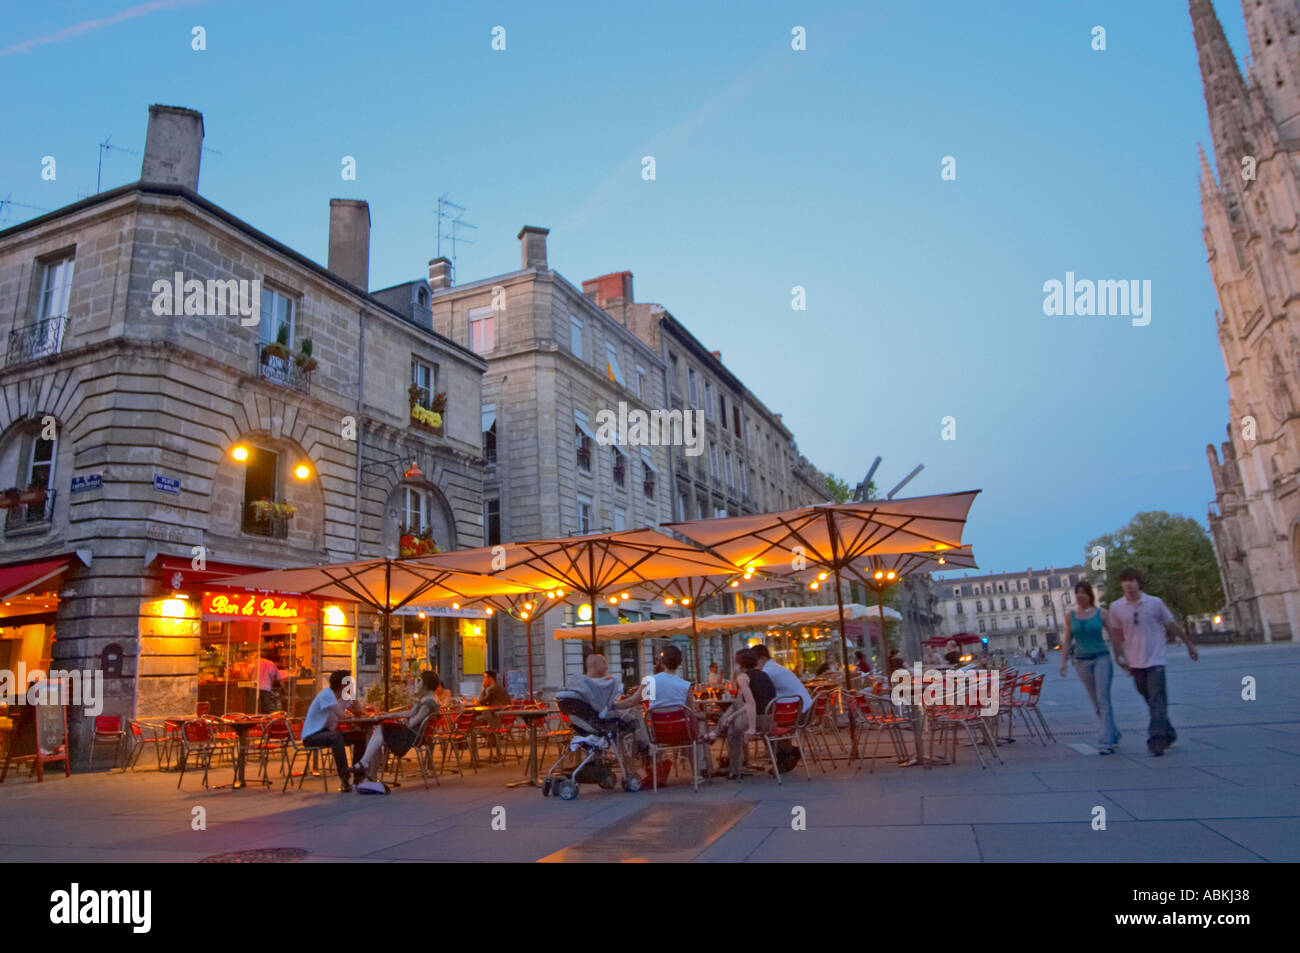 A cafe on the place pey berland in Bordeaux, outside seating terrasse lit  by electric lights, people sitting drinking and walking on the square,  Place Pey Berland. city Bordeaux Gironde Aquitaine France